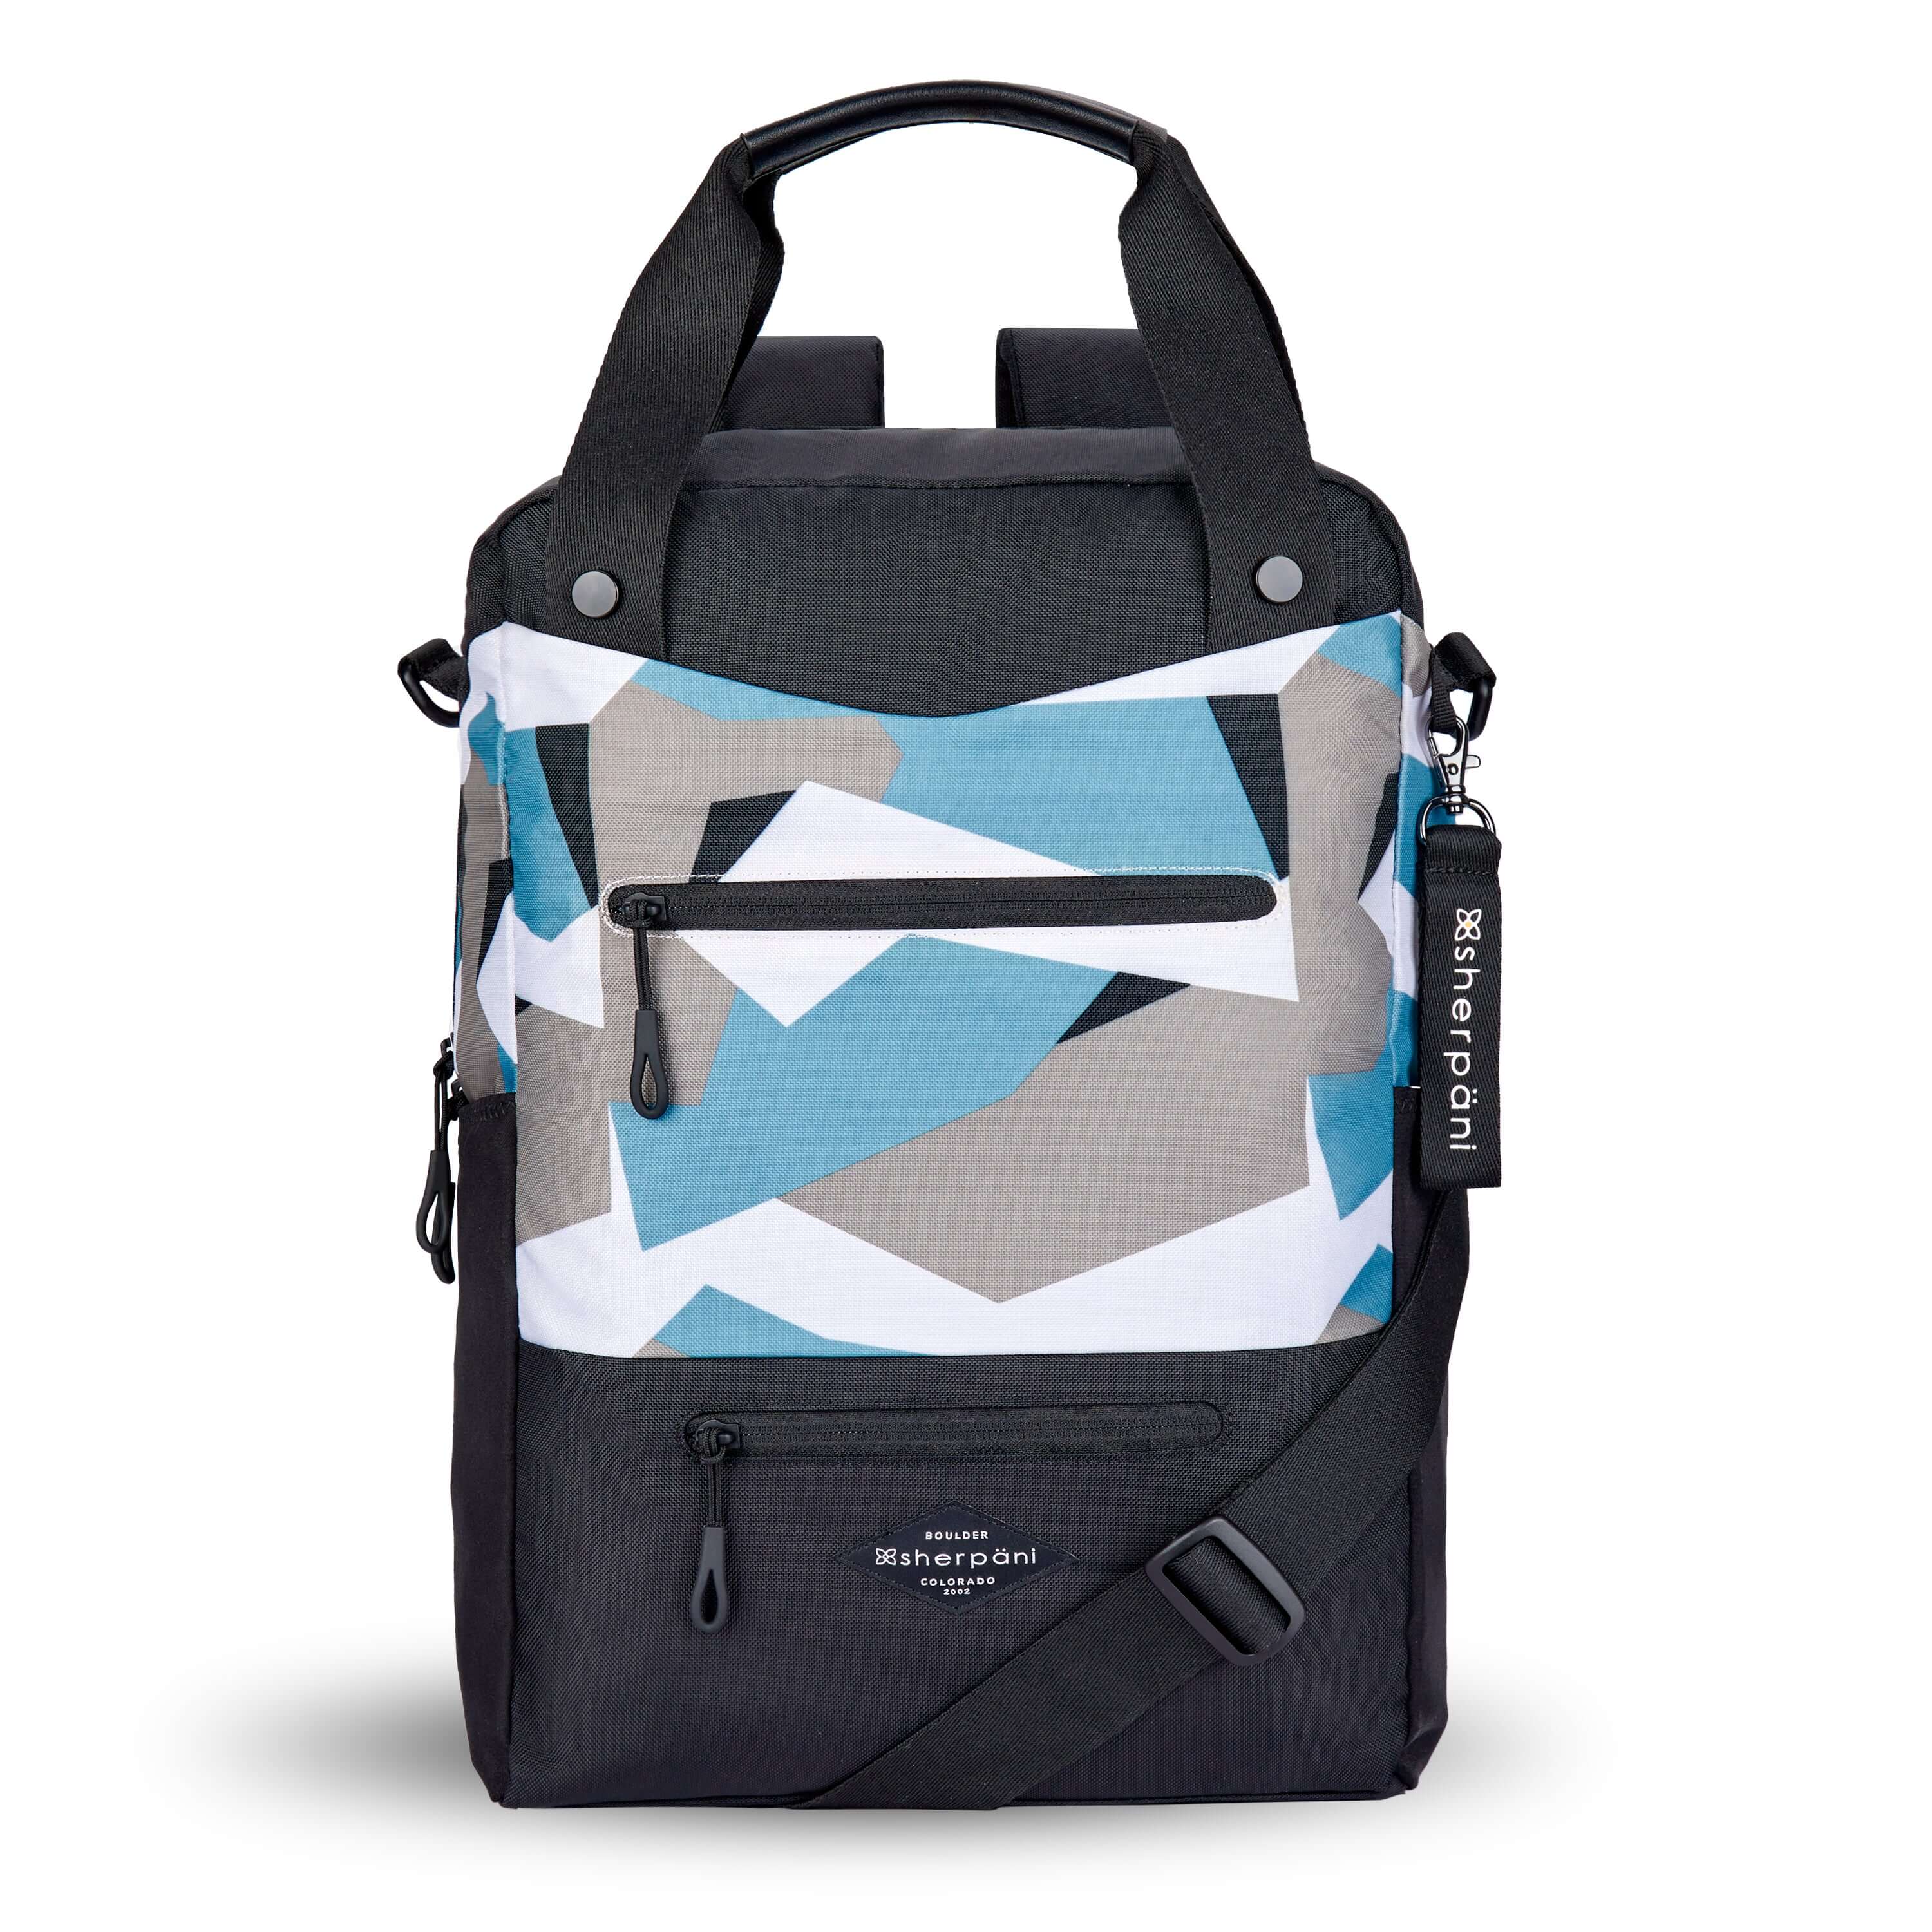 Flat front view of Sherpani's three-in-one bag, the Camden in Summer Camo. The bag is two-toned in black and in a camouflage pattern of blue, grey and white. There are two external zipper pockets on the front panel with easy-pull zippers in black. A branded Sherpani keychain is clipped to the upper right corner. An water bottle holder sits on either side of the bag. The bag has an adjustable crossbody strap, padded/adjustable backpack straps and short tote handles fixed at the top. 